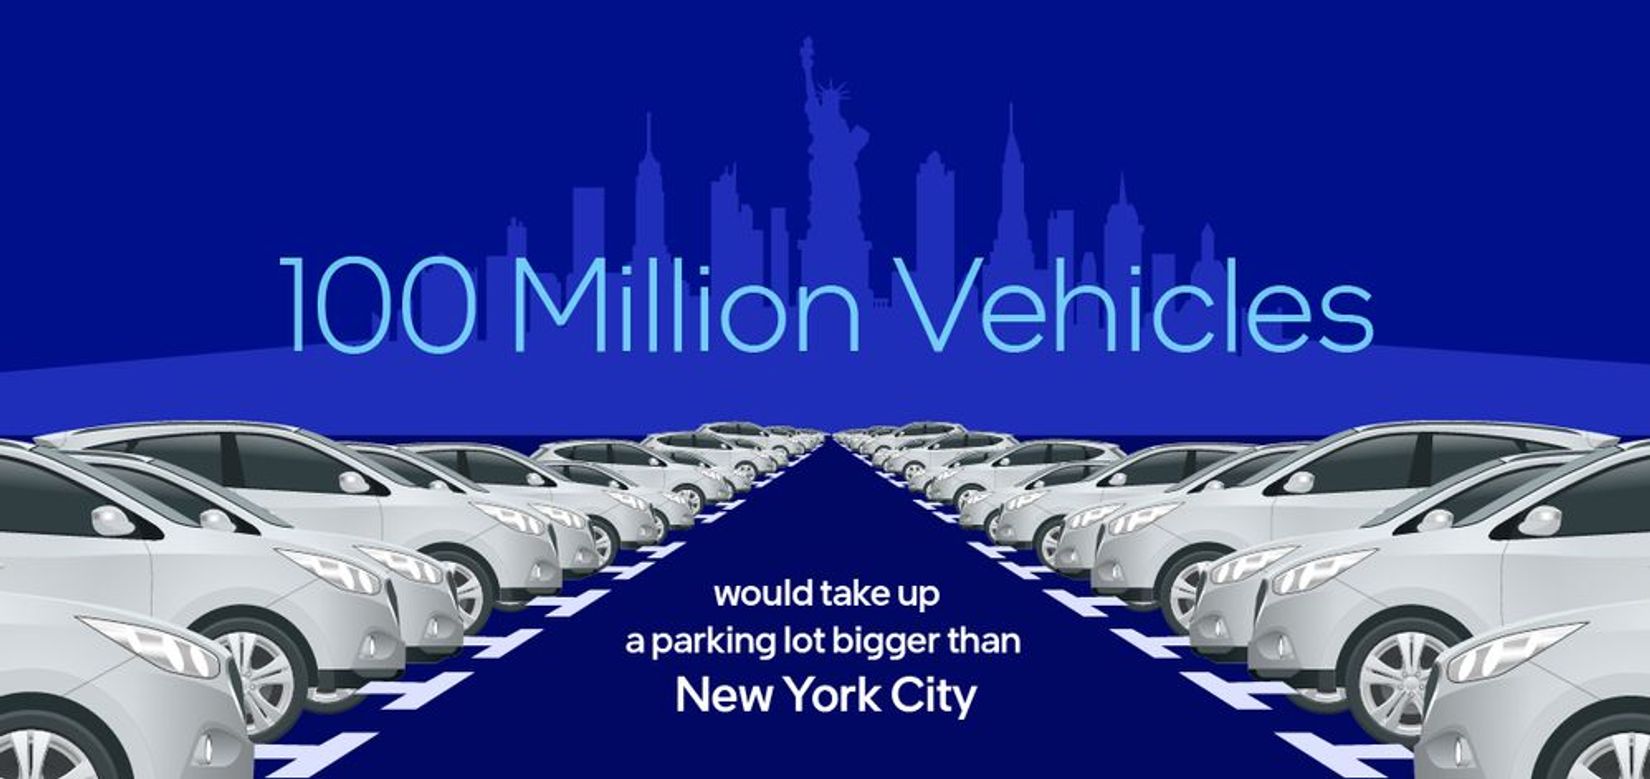 100 million vehicles equipped with Mobileye EyeQ chips would take up a parking lot bigger than New York City